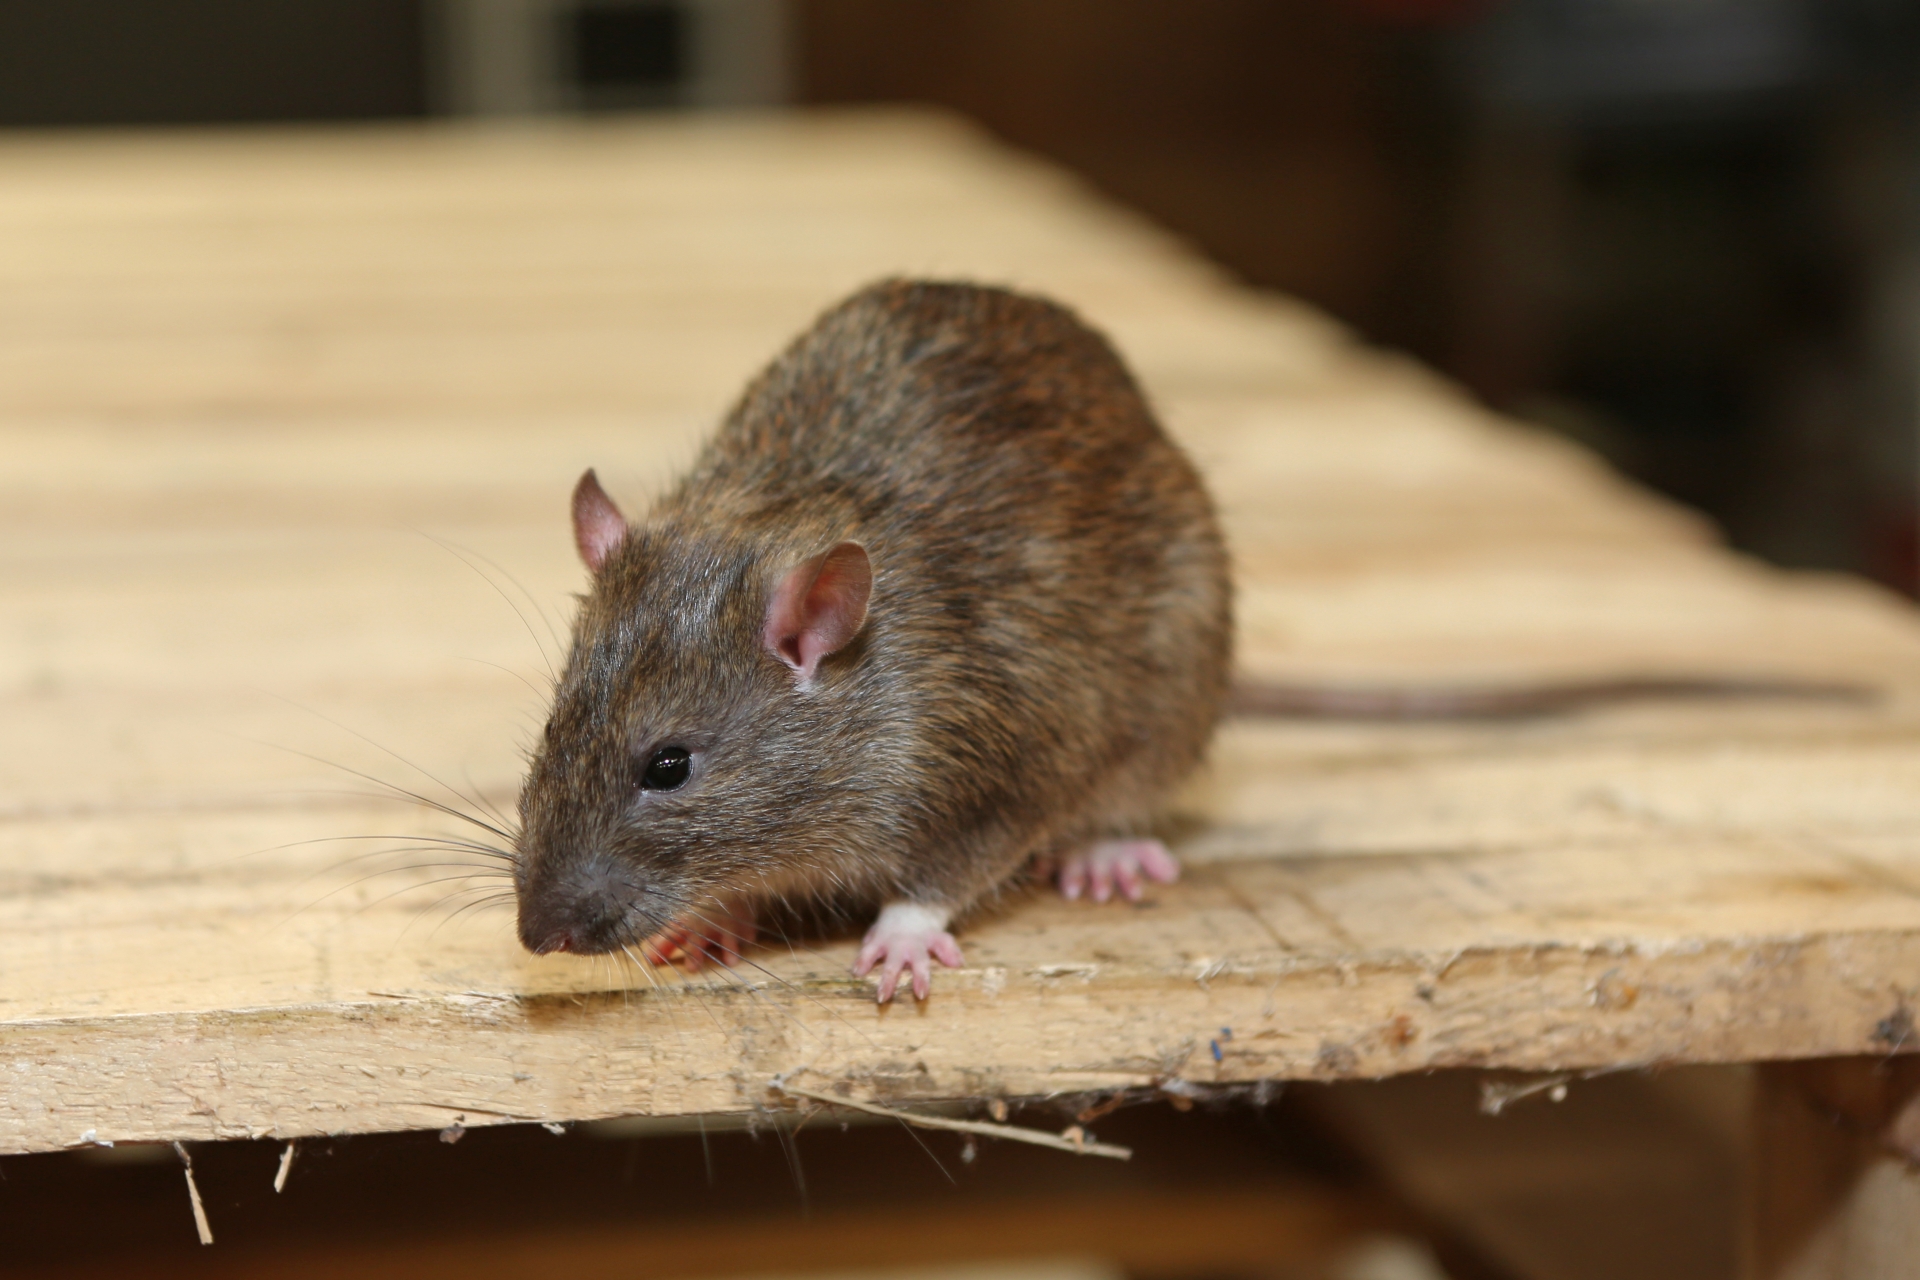 Rat Infestation, Pest Control in Addlestone, New Haw, Woodham, KT15. Call Now 020 8166 9746